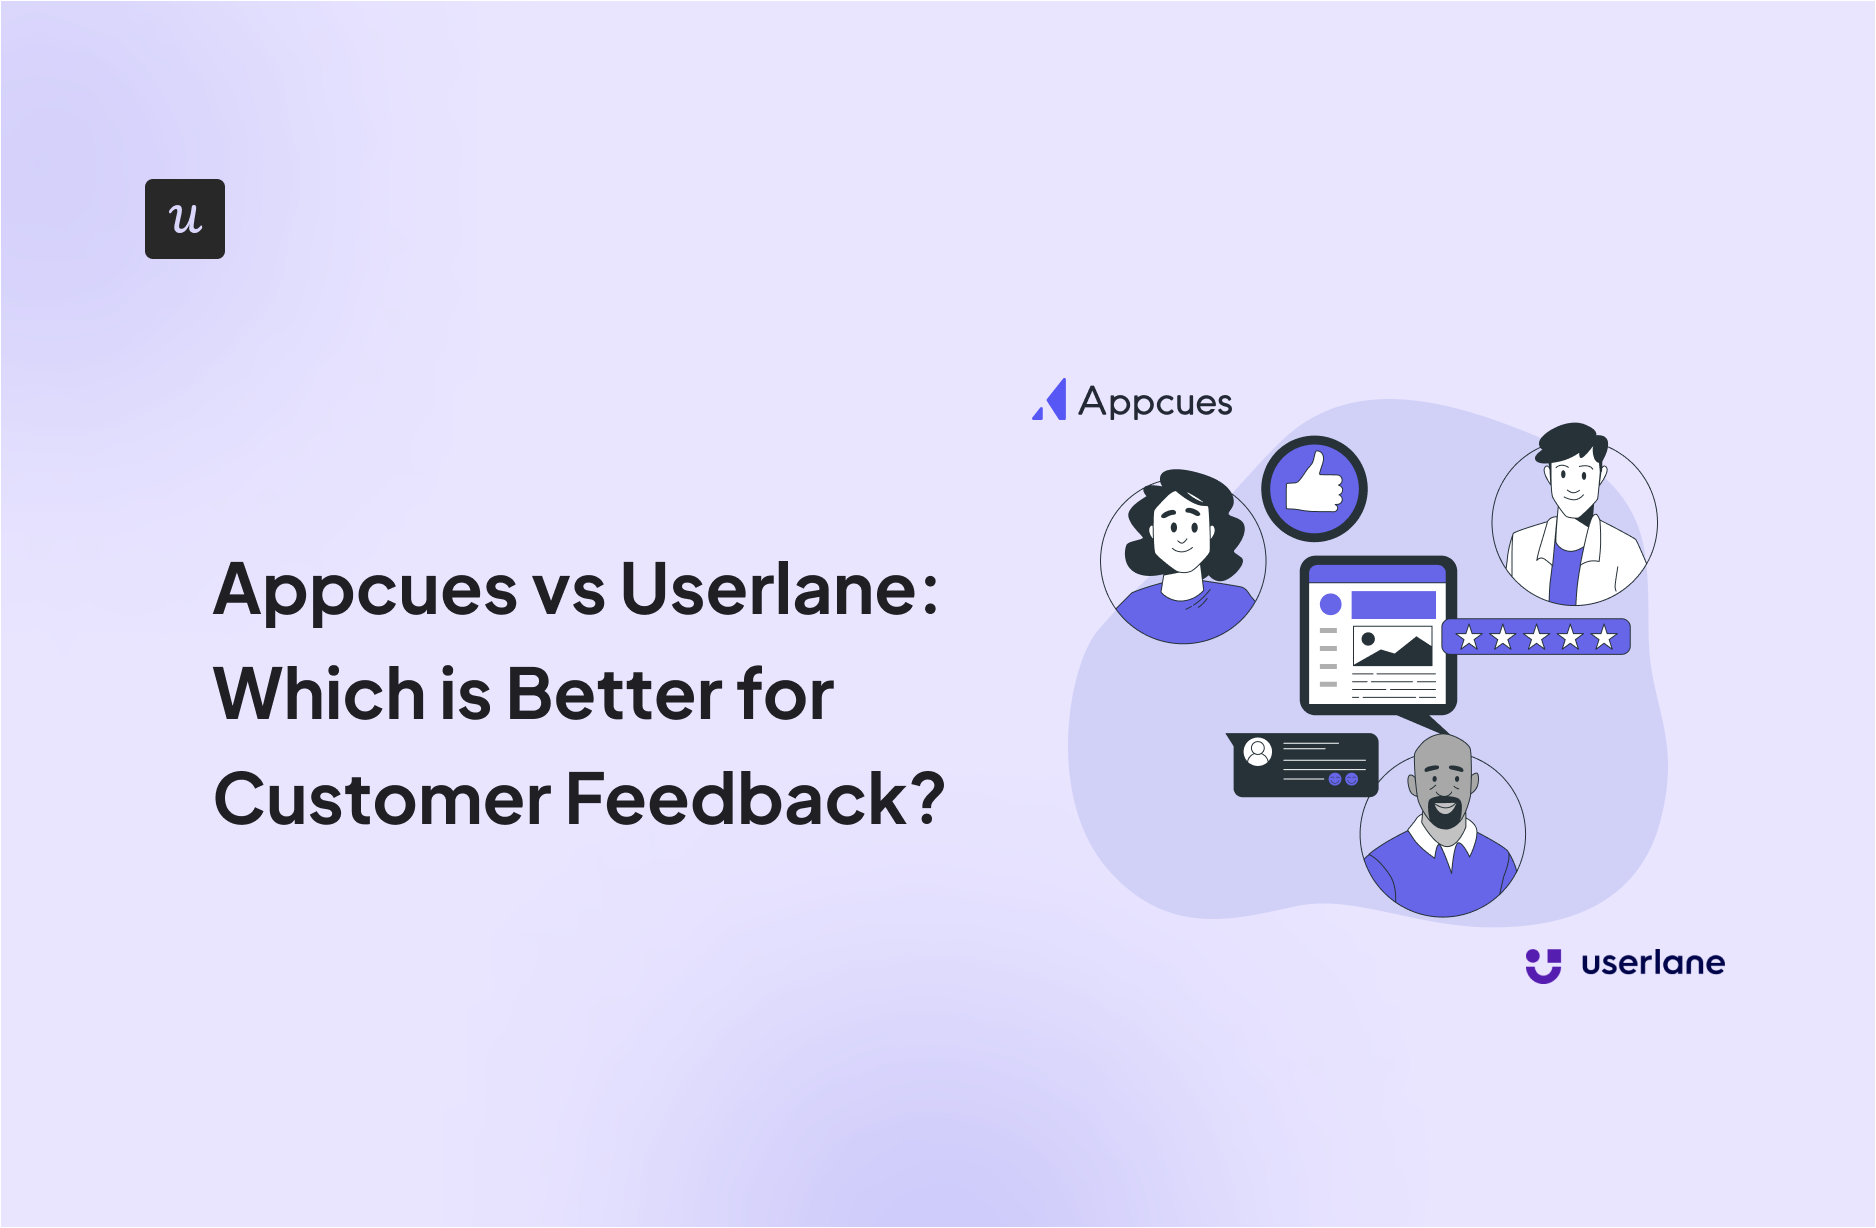 Appcues vs Userlane: Which is Better for Customer Feedback?